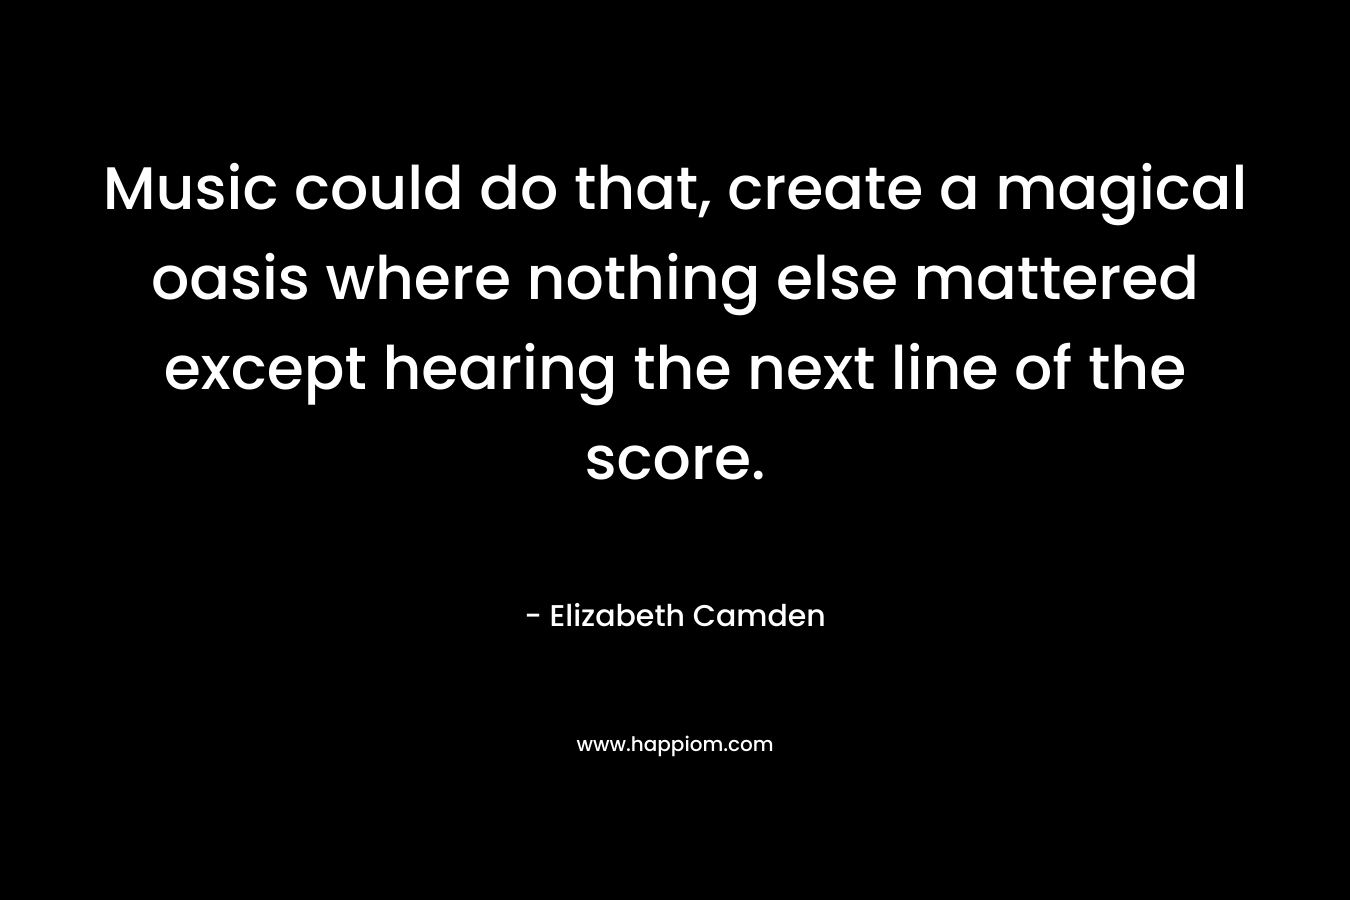 Music could do that, create a magical oasis where nothing else mattered except hearing the next line of the score. – Elizabeth Camden